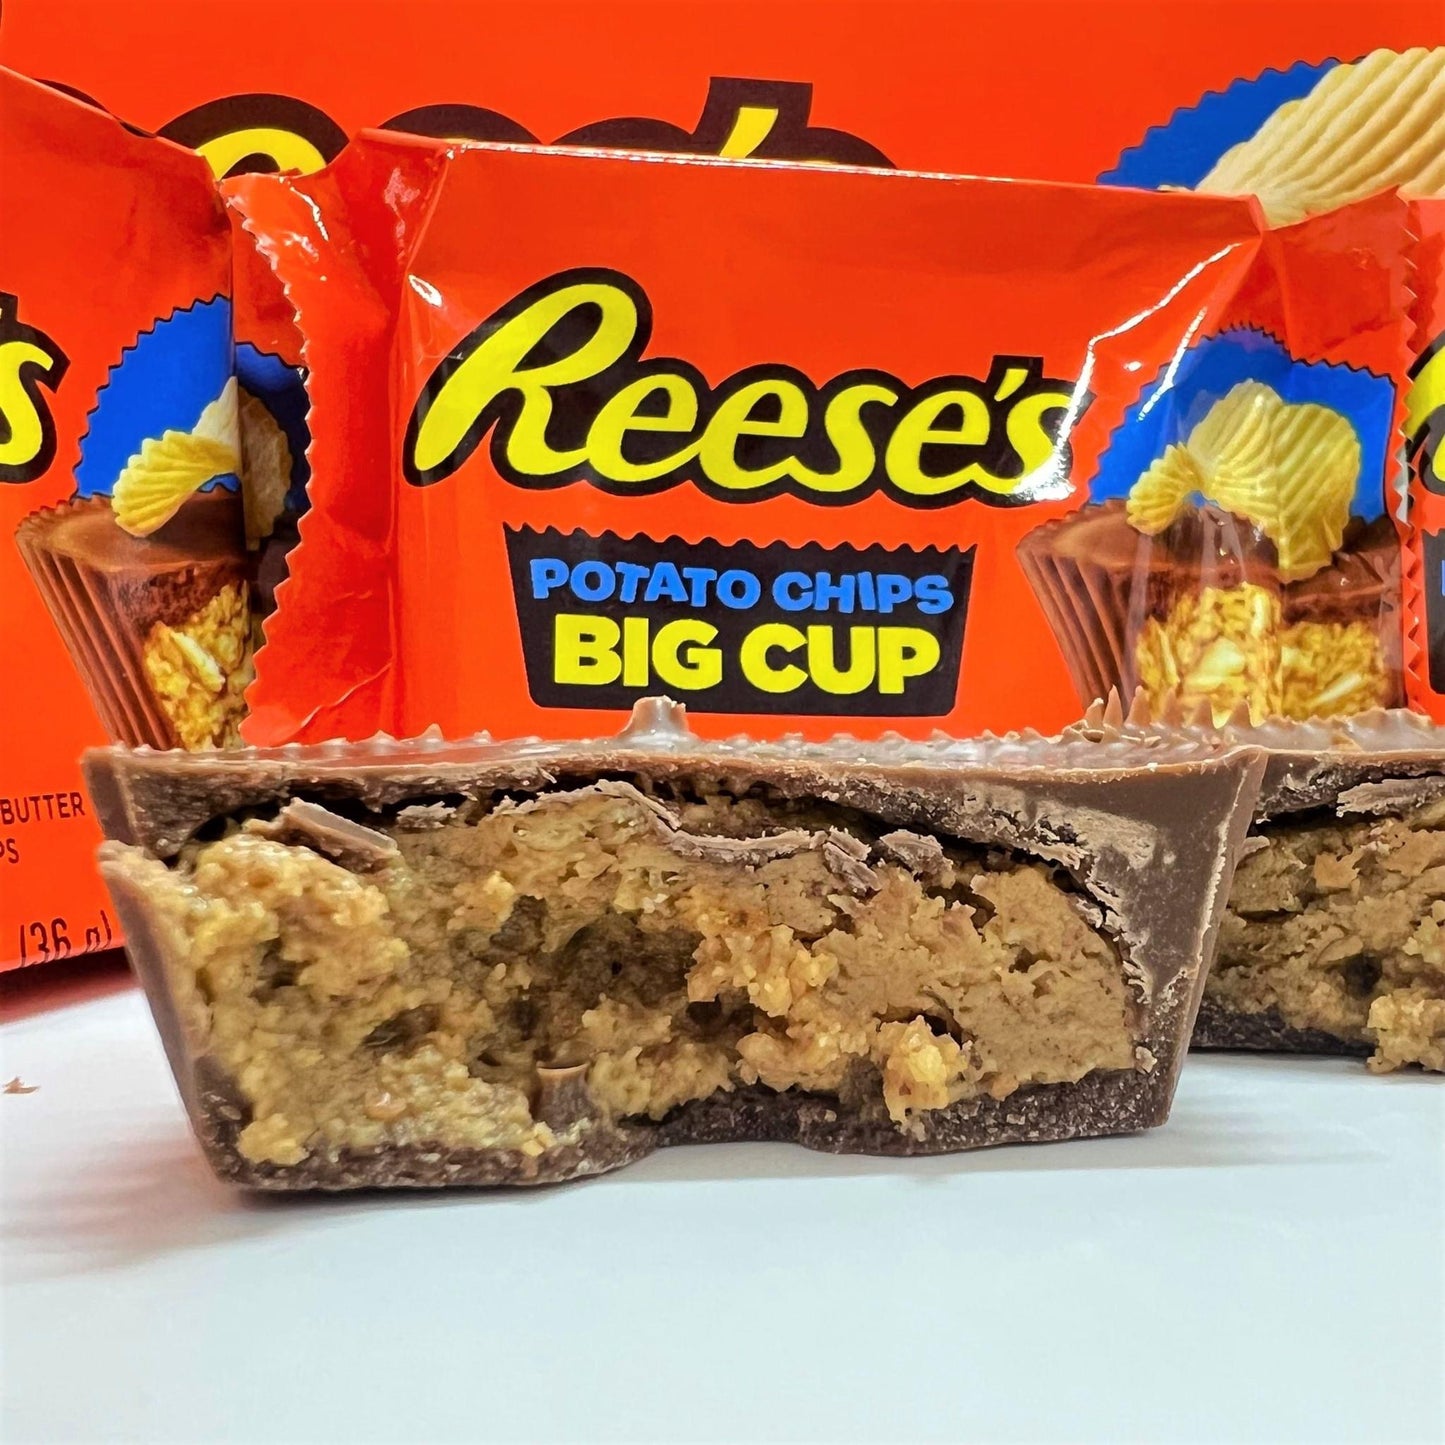 Reese's Big Cup With Potato Chips